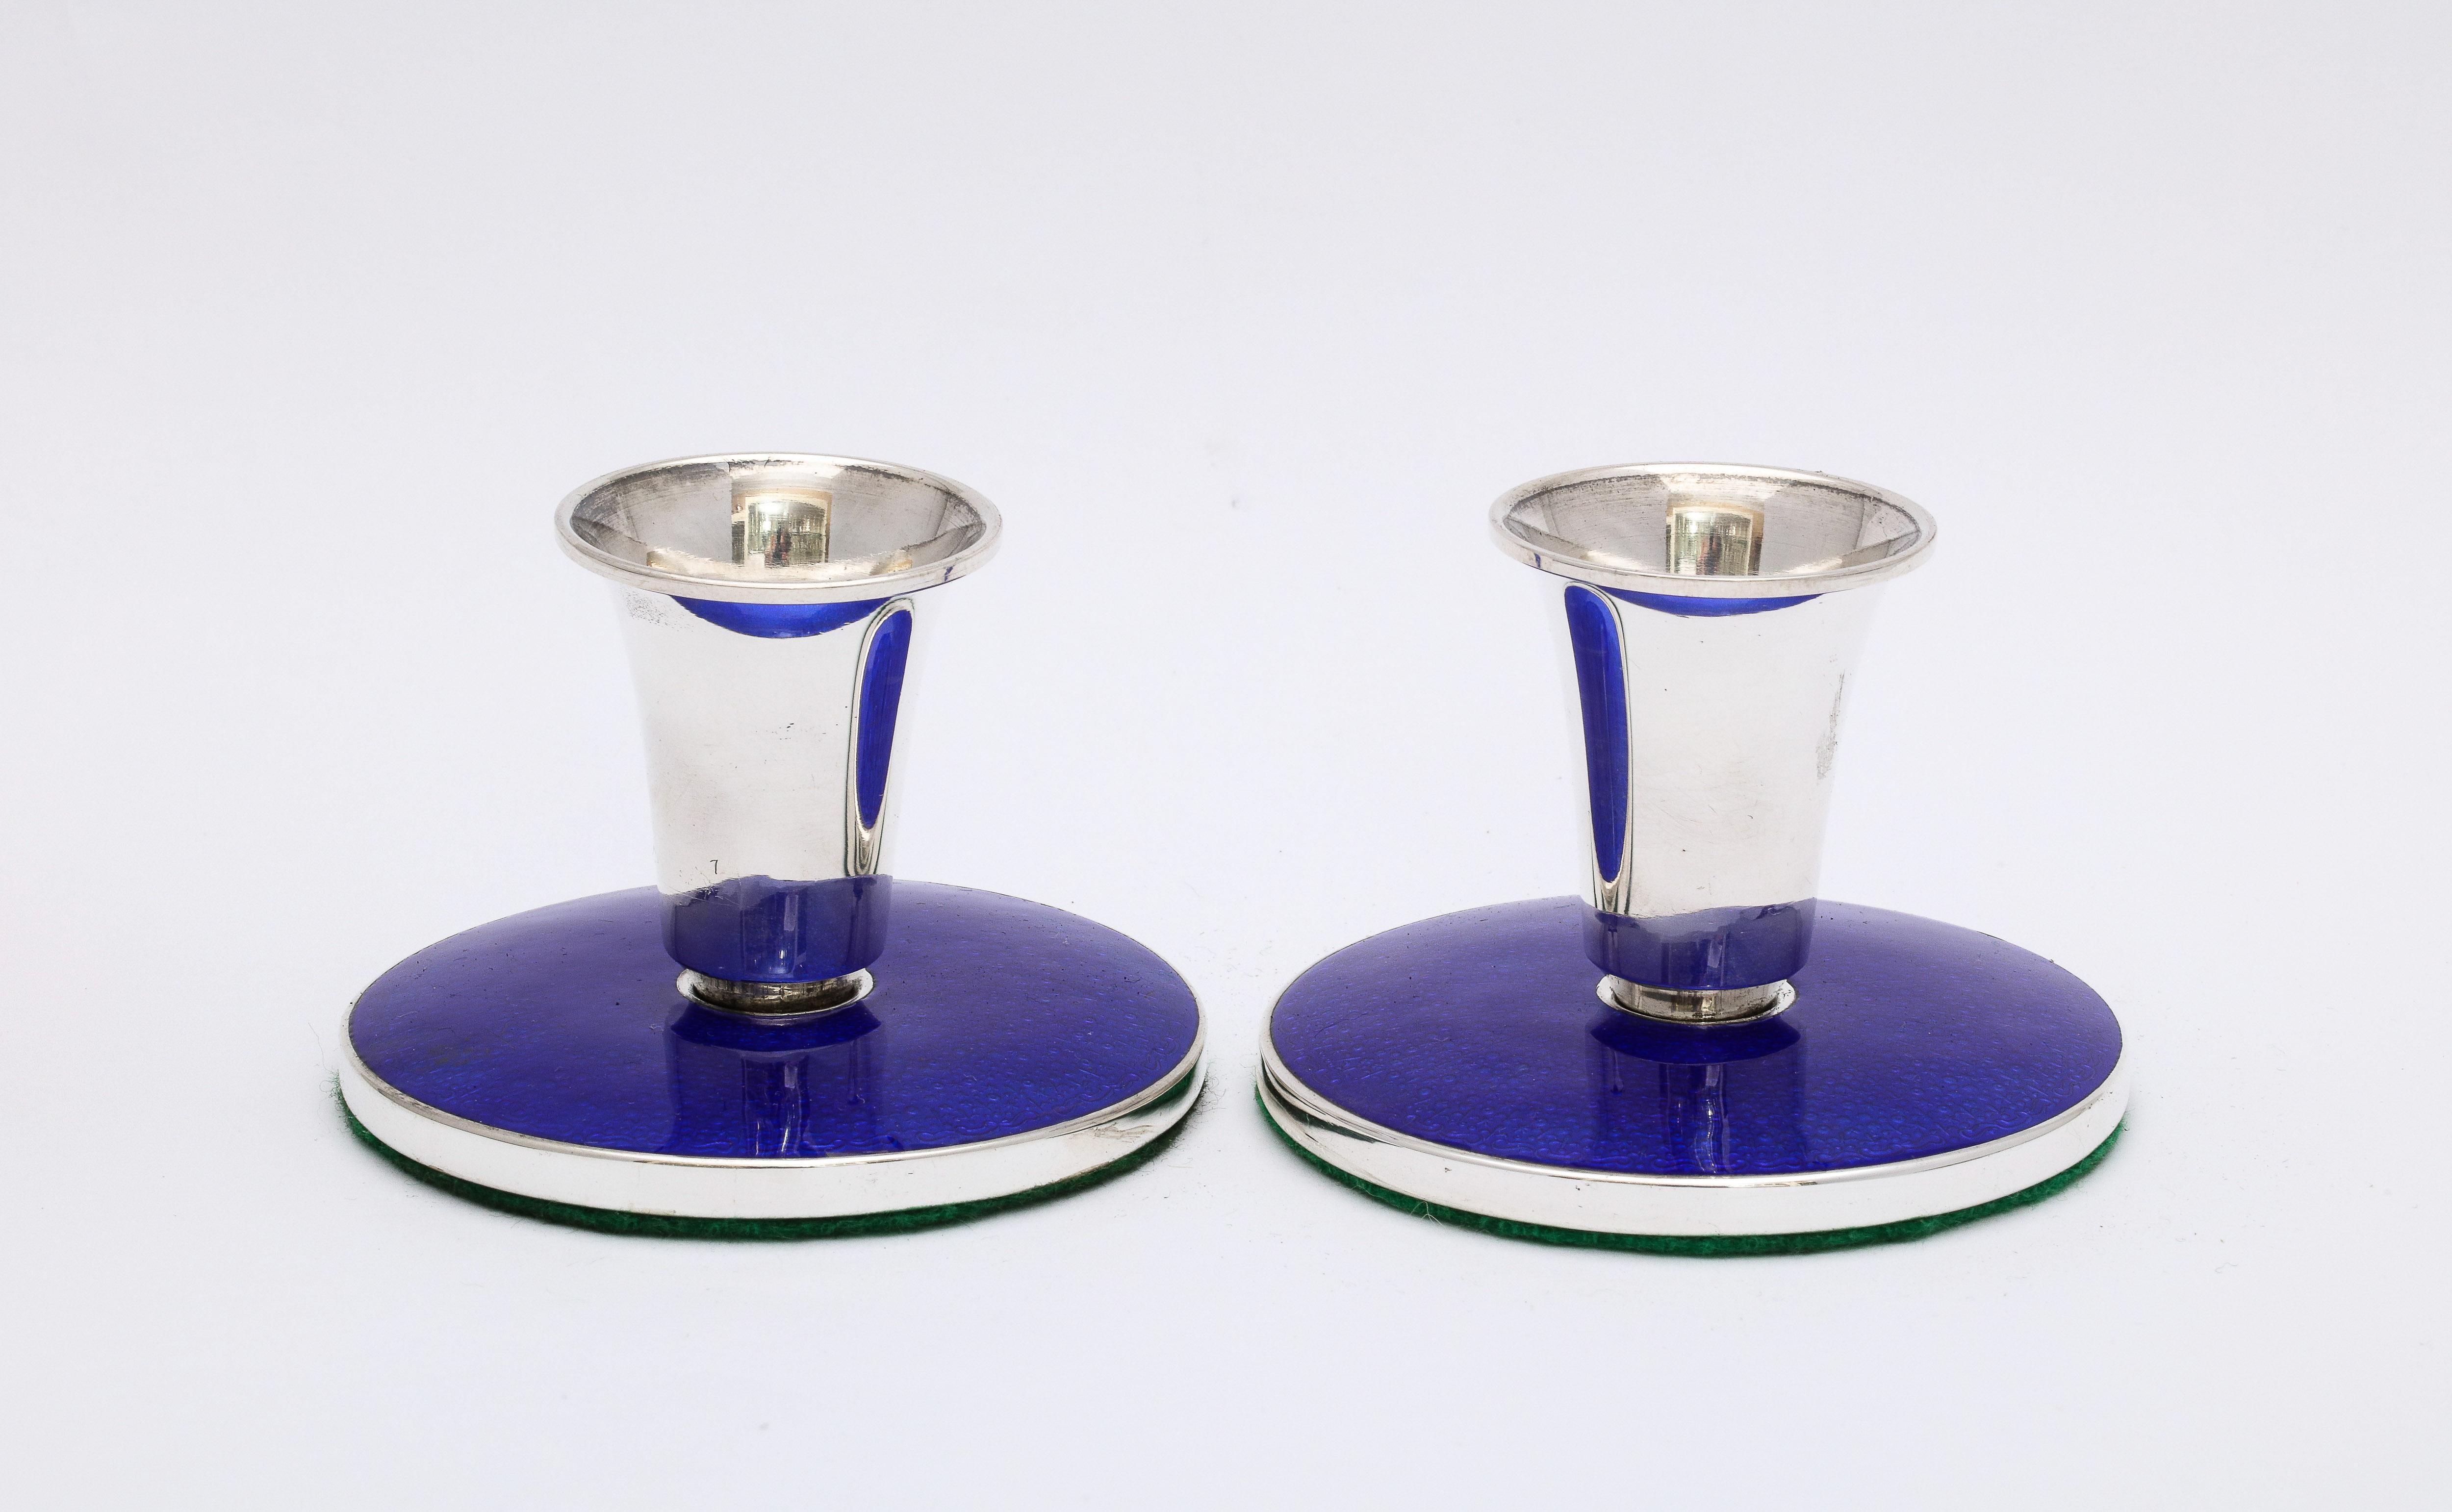 Pair of Mid-Century Modern, sterling silver and cobalt blue guilloche enamel (which is in excellent condition) candlesticks, Denmark, 1960s, Meka Co. - makers. Each measures 2 1/4 inches high x 3 inches diameter. Underside of each is covered in